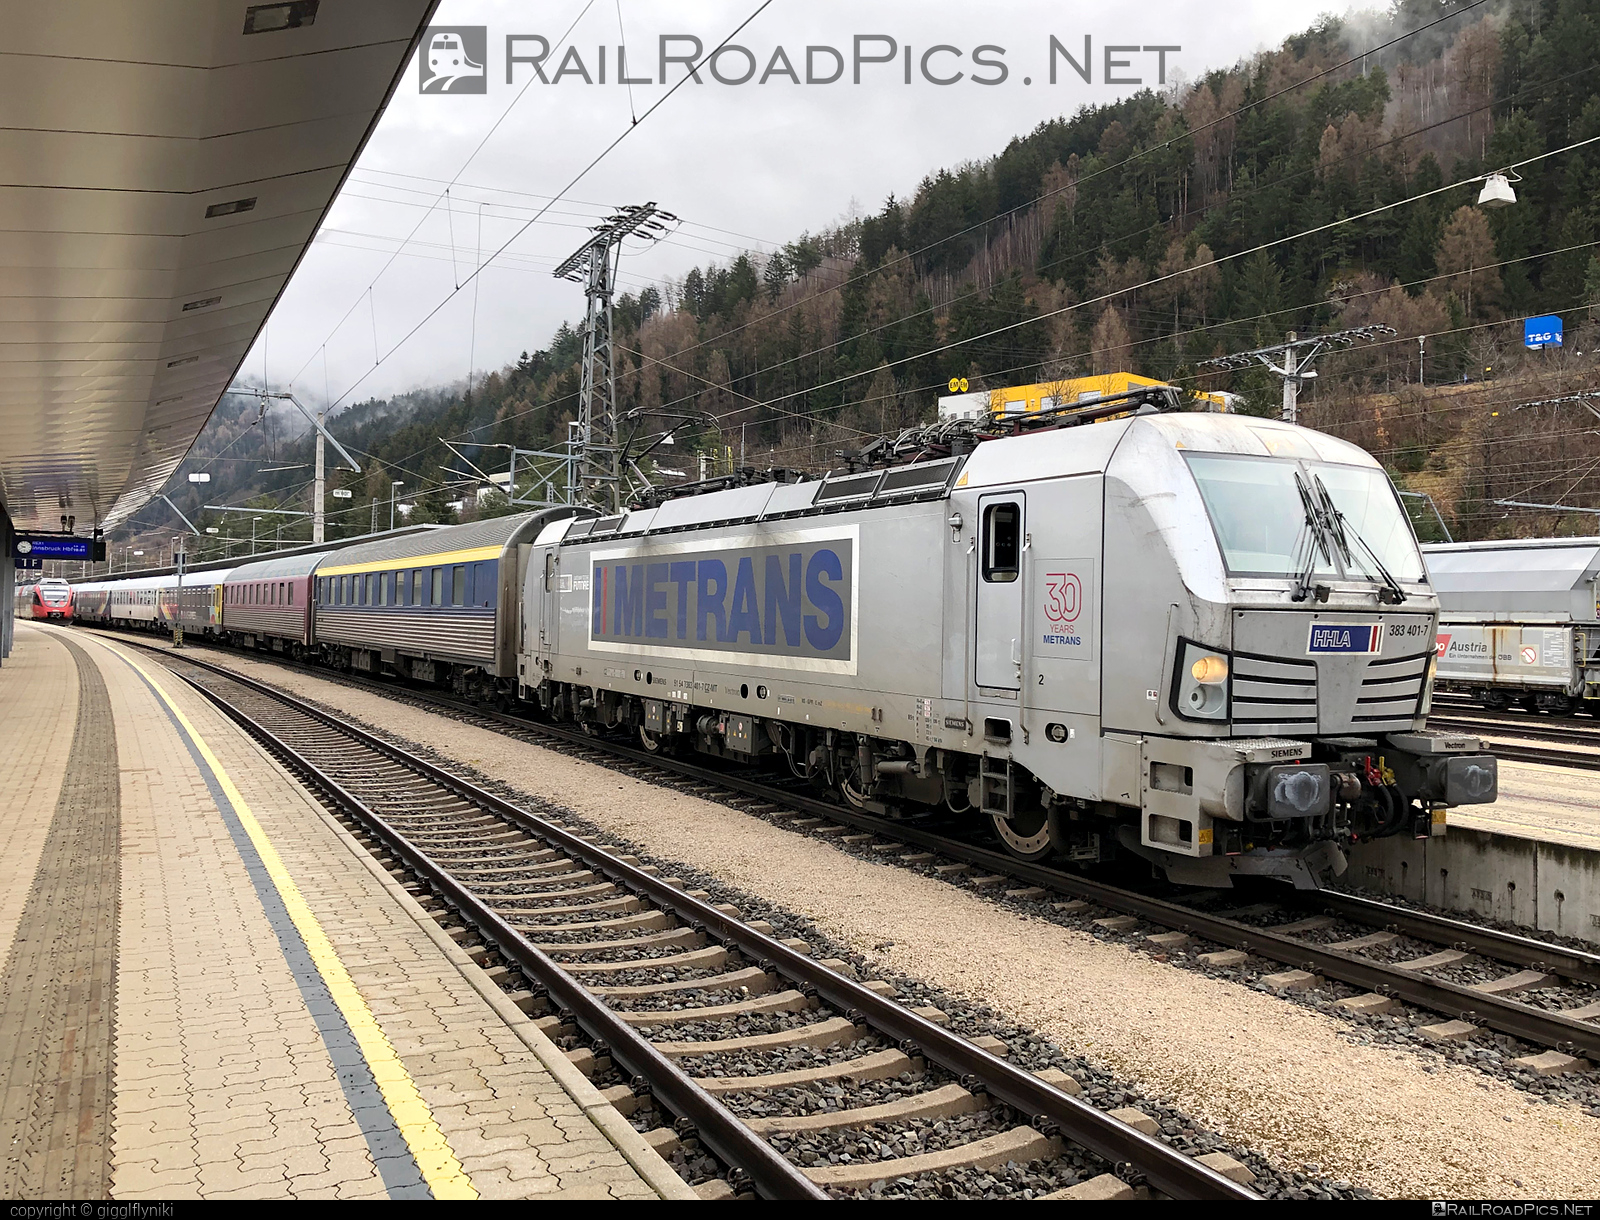 Siemens Vectron MS - 383 401-7 operated by METRANS, a.s. #hhla #metrans #siemens #siemensVectron #siemensVectronMS #urlaubsexpress #vectron #vectronMS